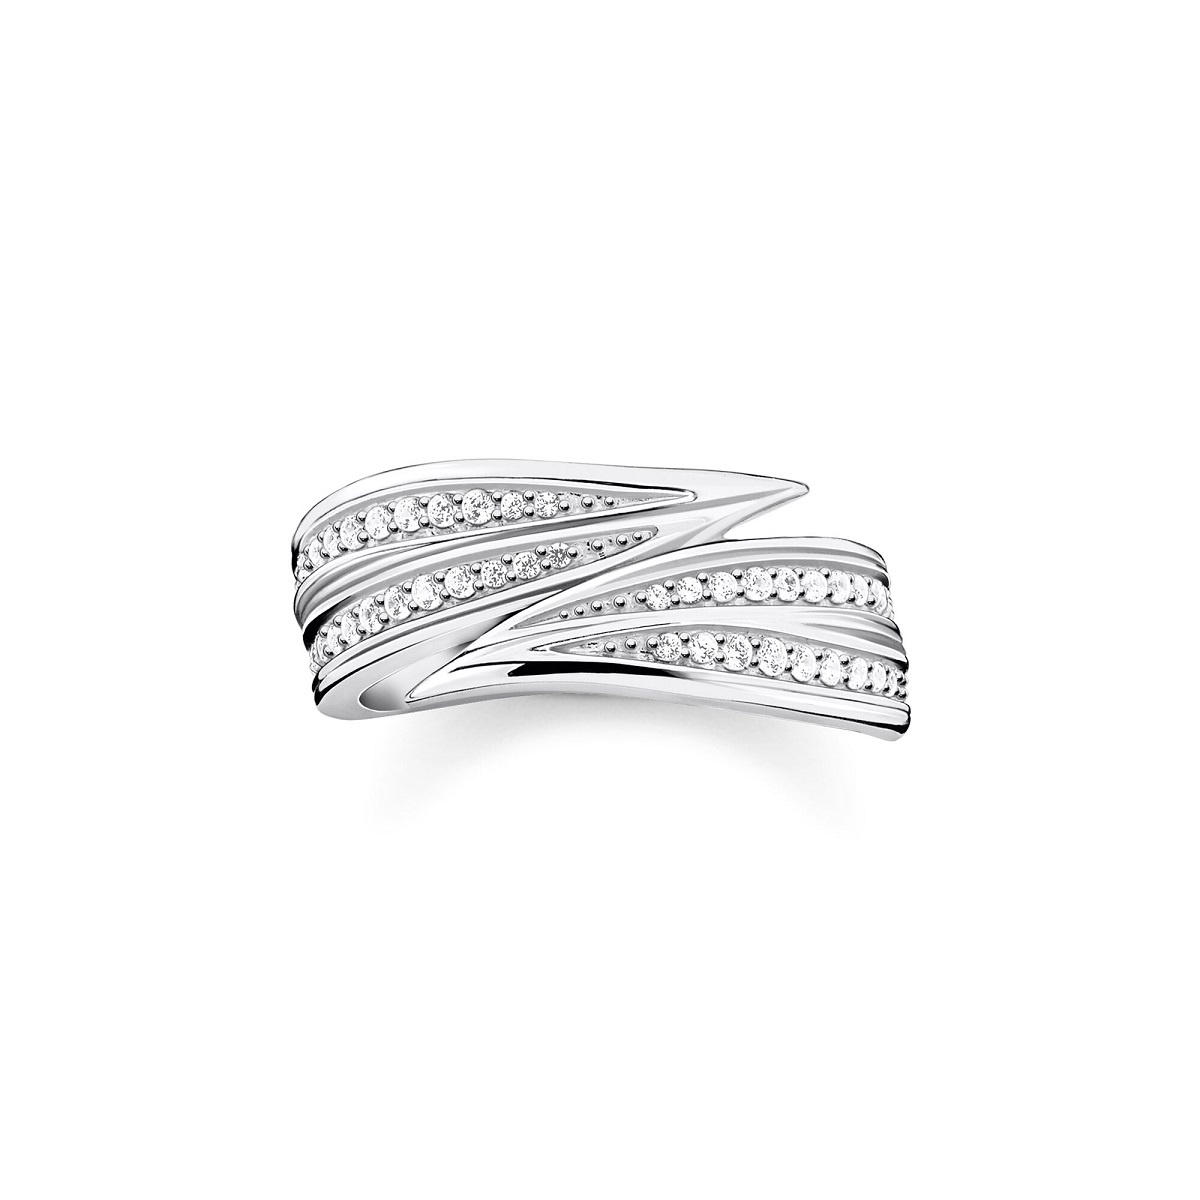 Thomas Sabo Silver and Zirconia Leaves Ring 
TR2283-051-14